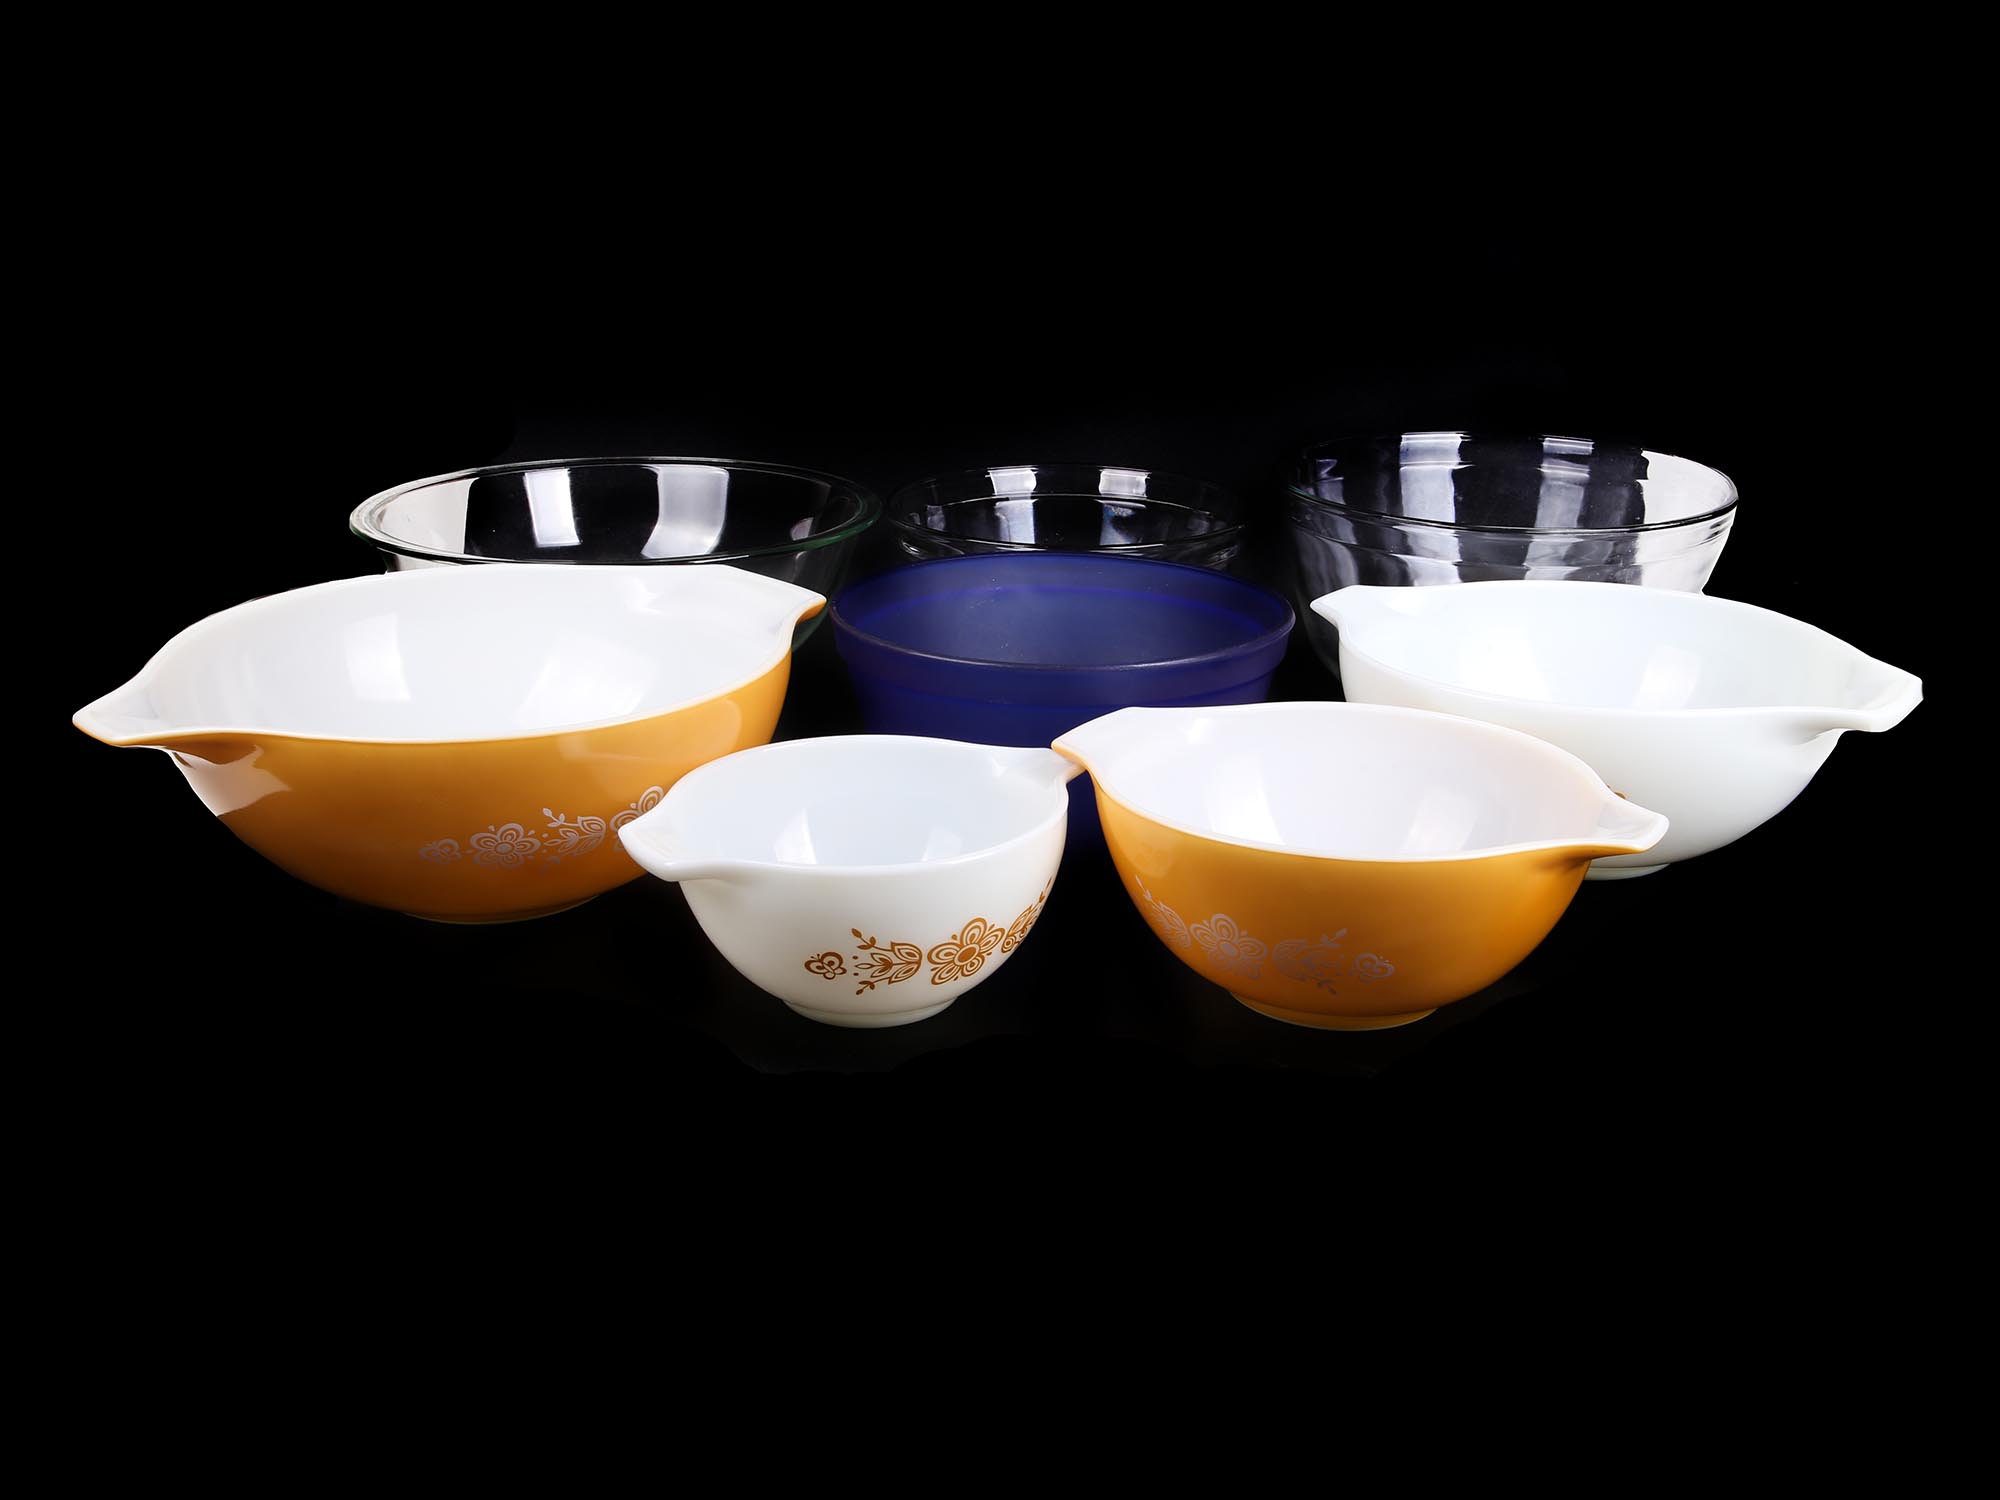 COLLECTION OF VARIOUS GLASS WARE BOWLS PYREX PIC-0